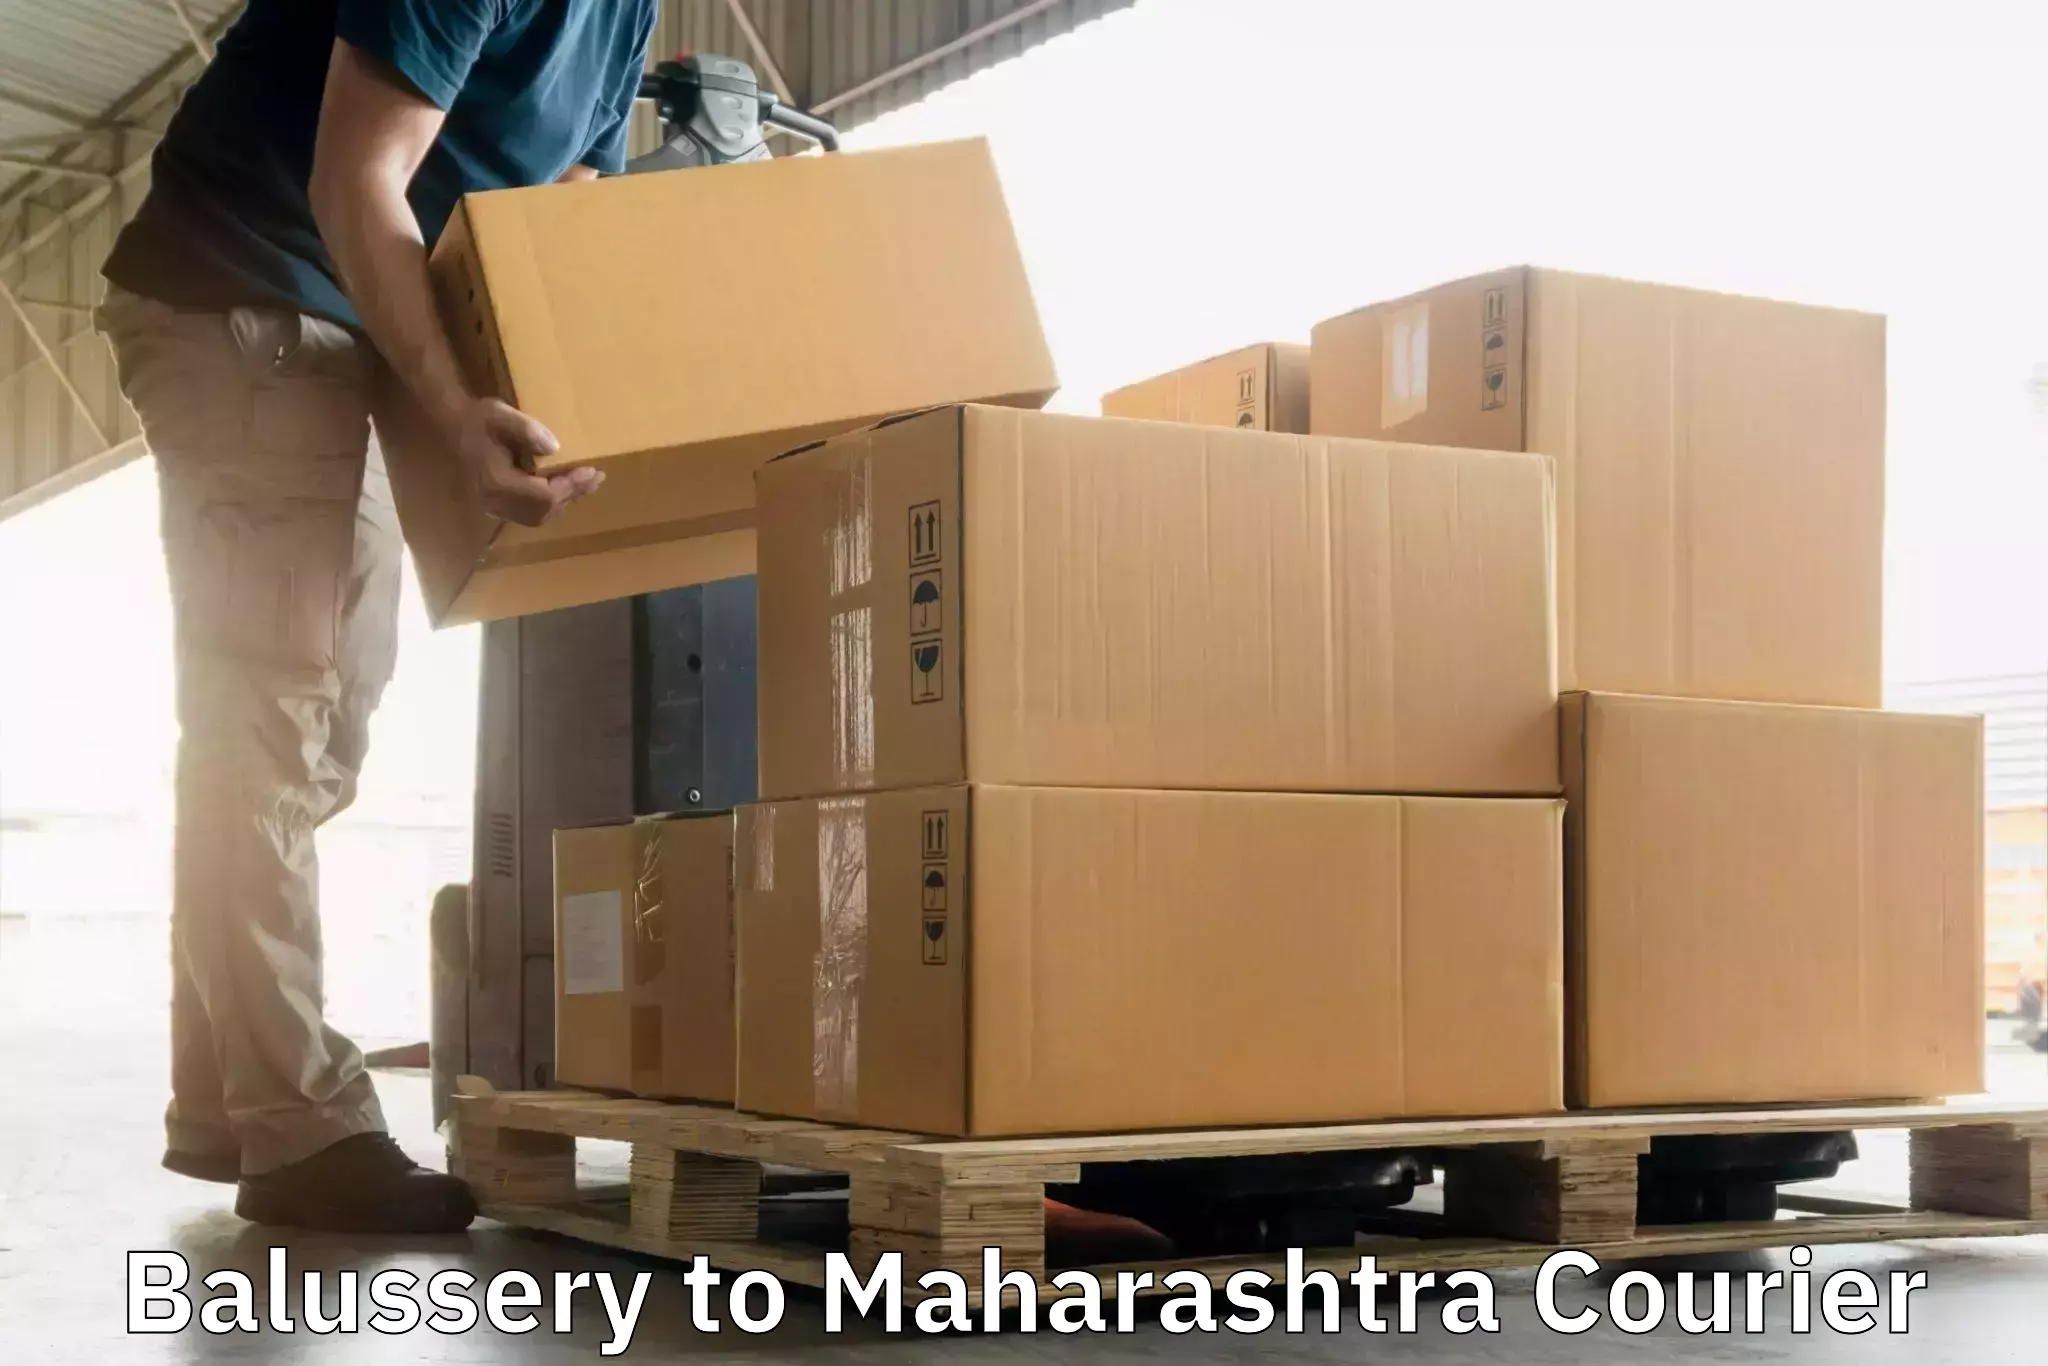 Modern delivery methods Balussery to Maharashtra